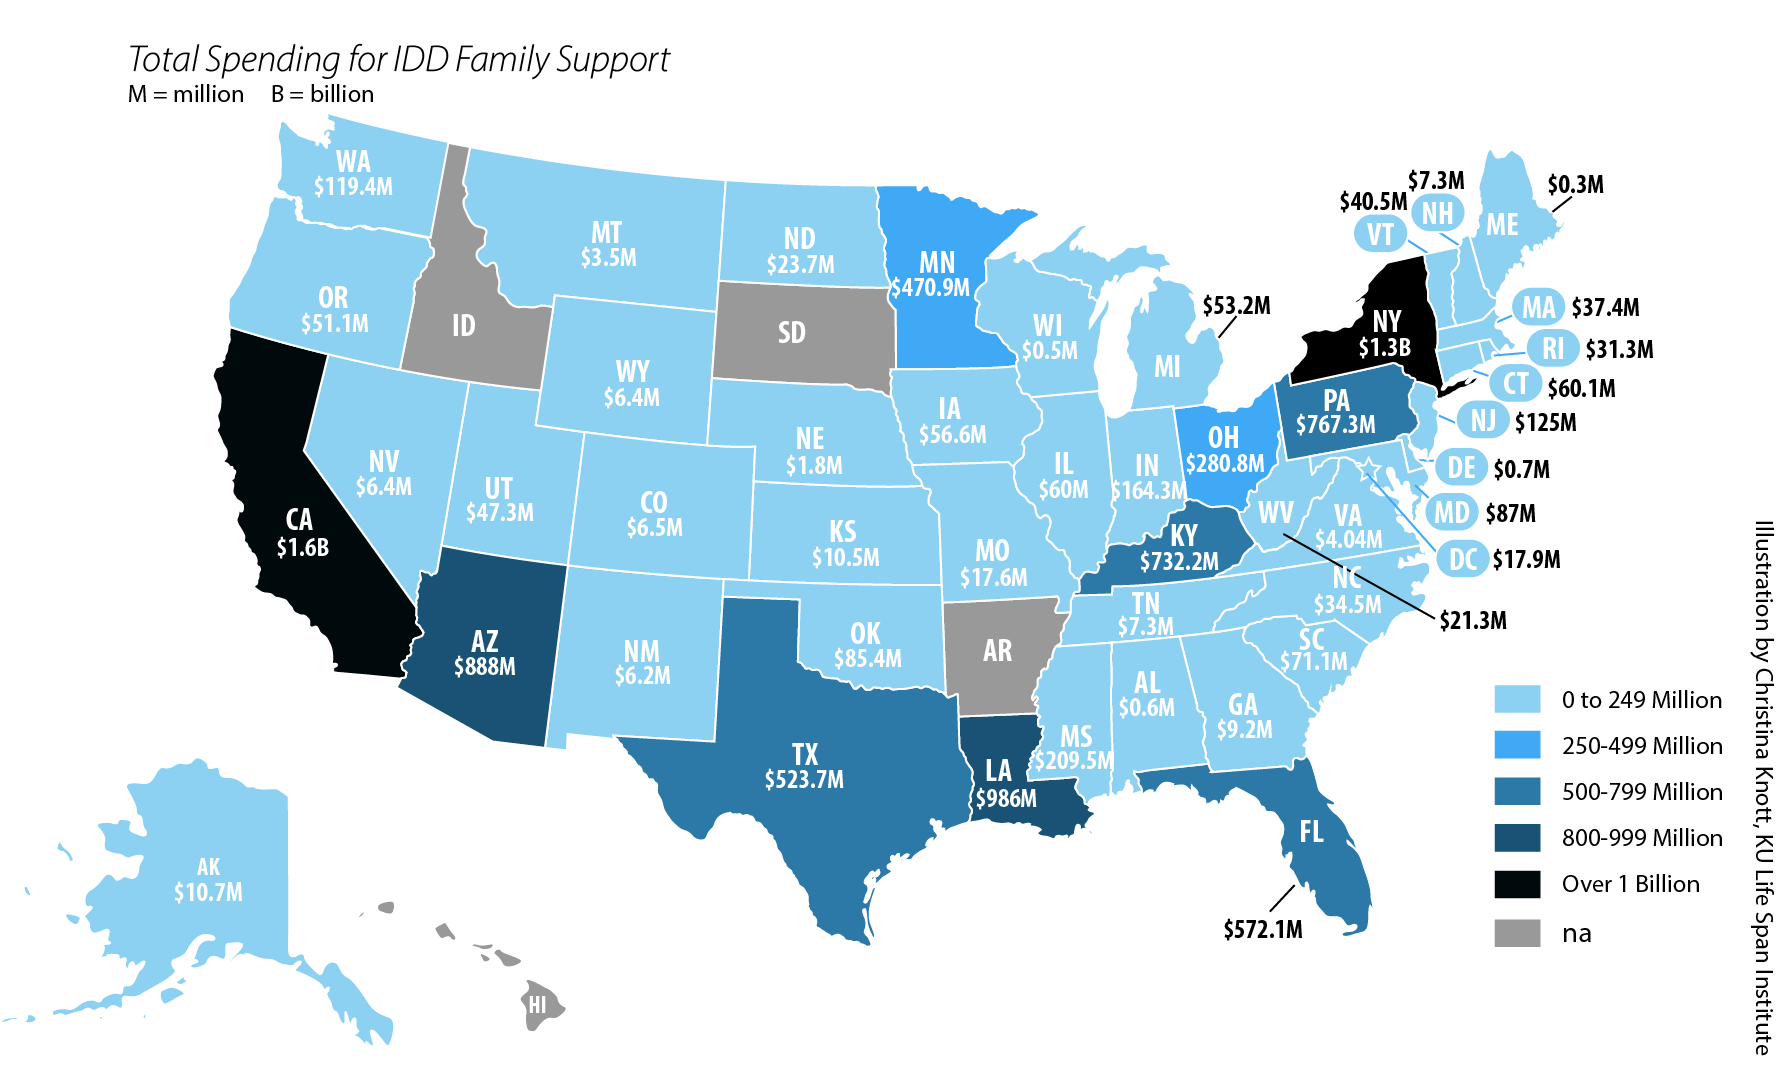 U.S. map showing total spending for IDD family support